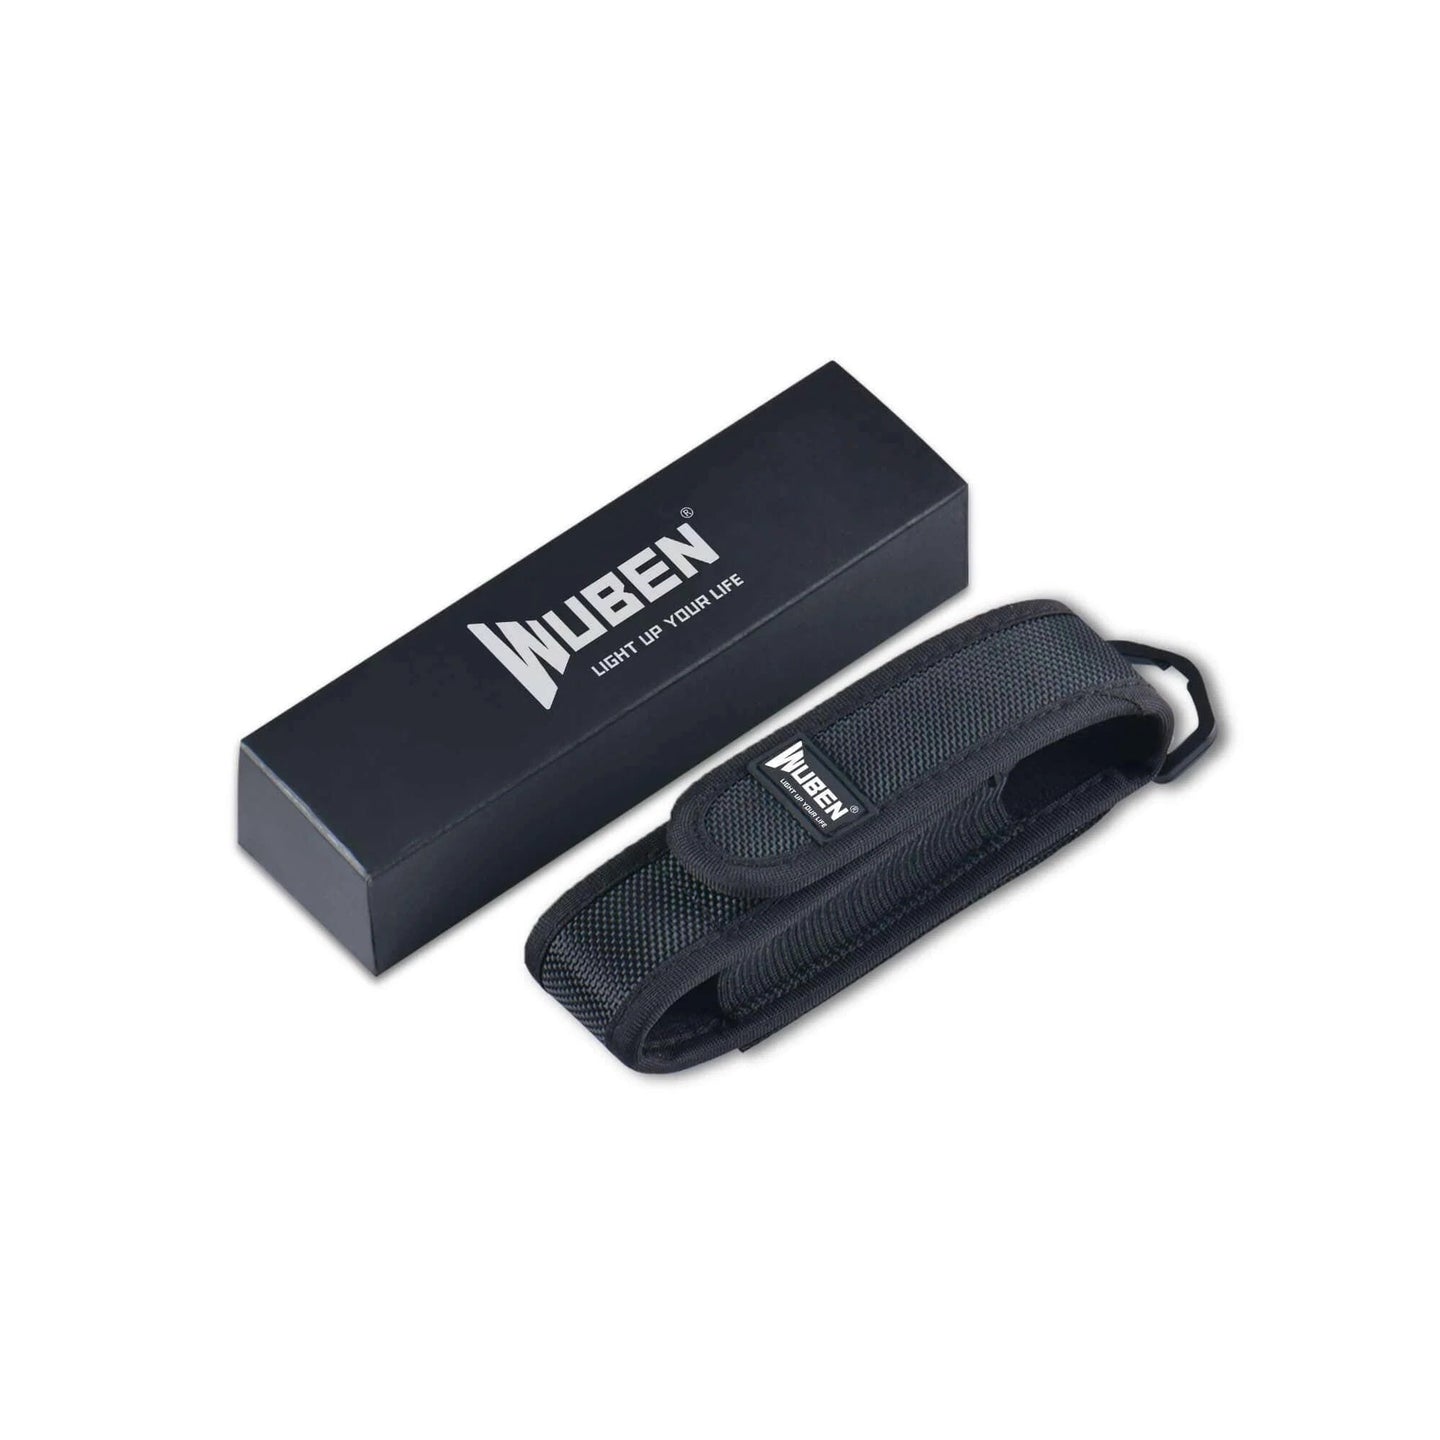 WUBEN flashlight pouch in black packaging and a carrying case